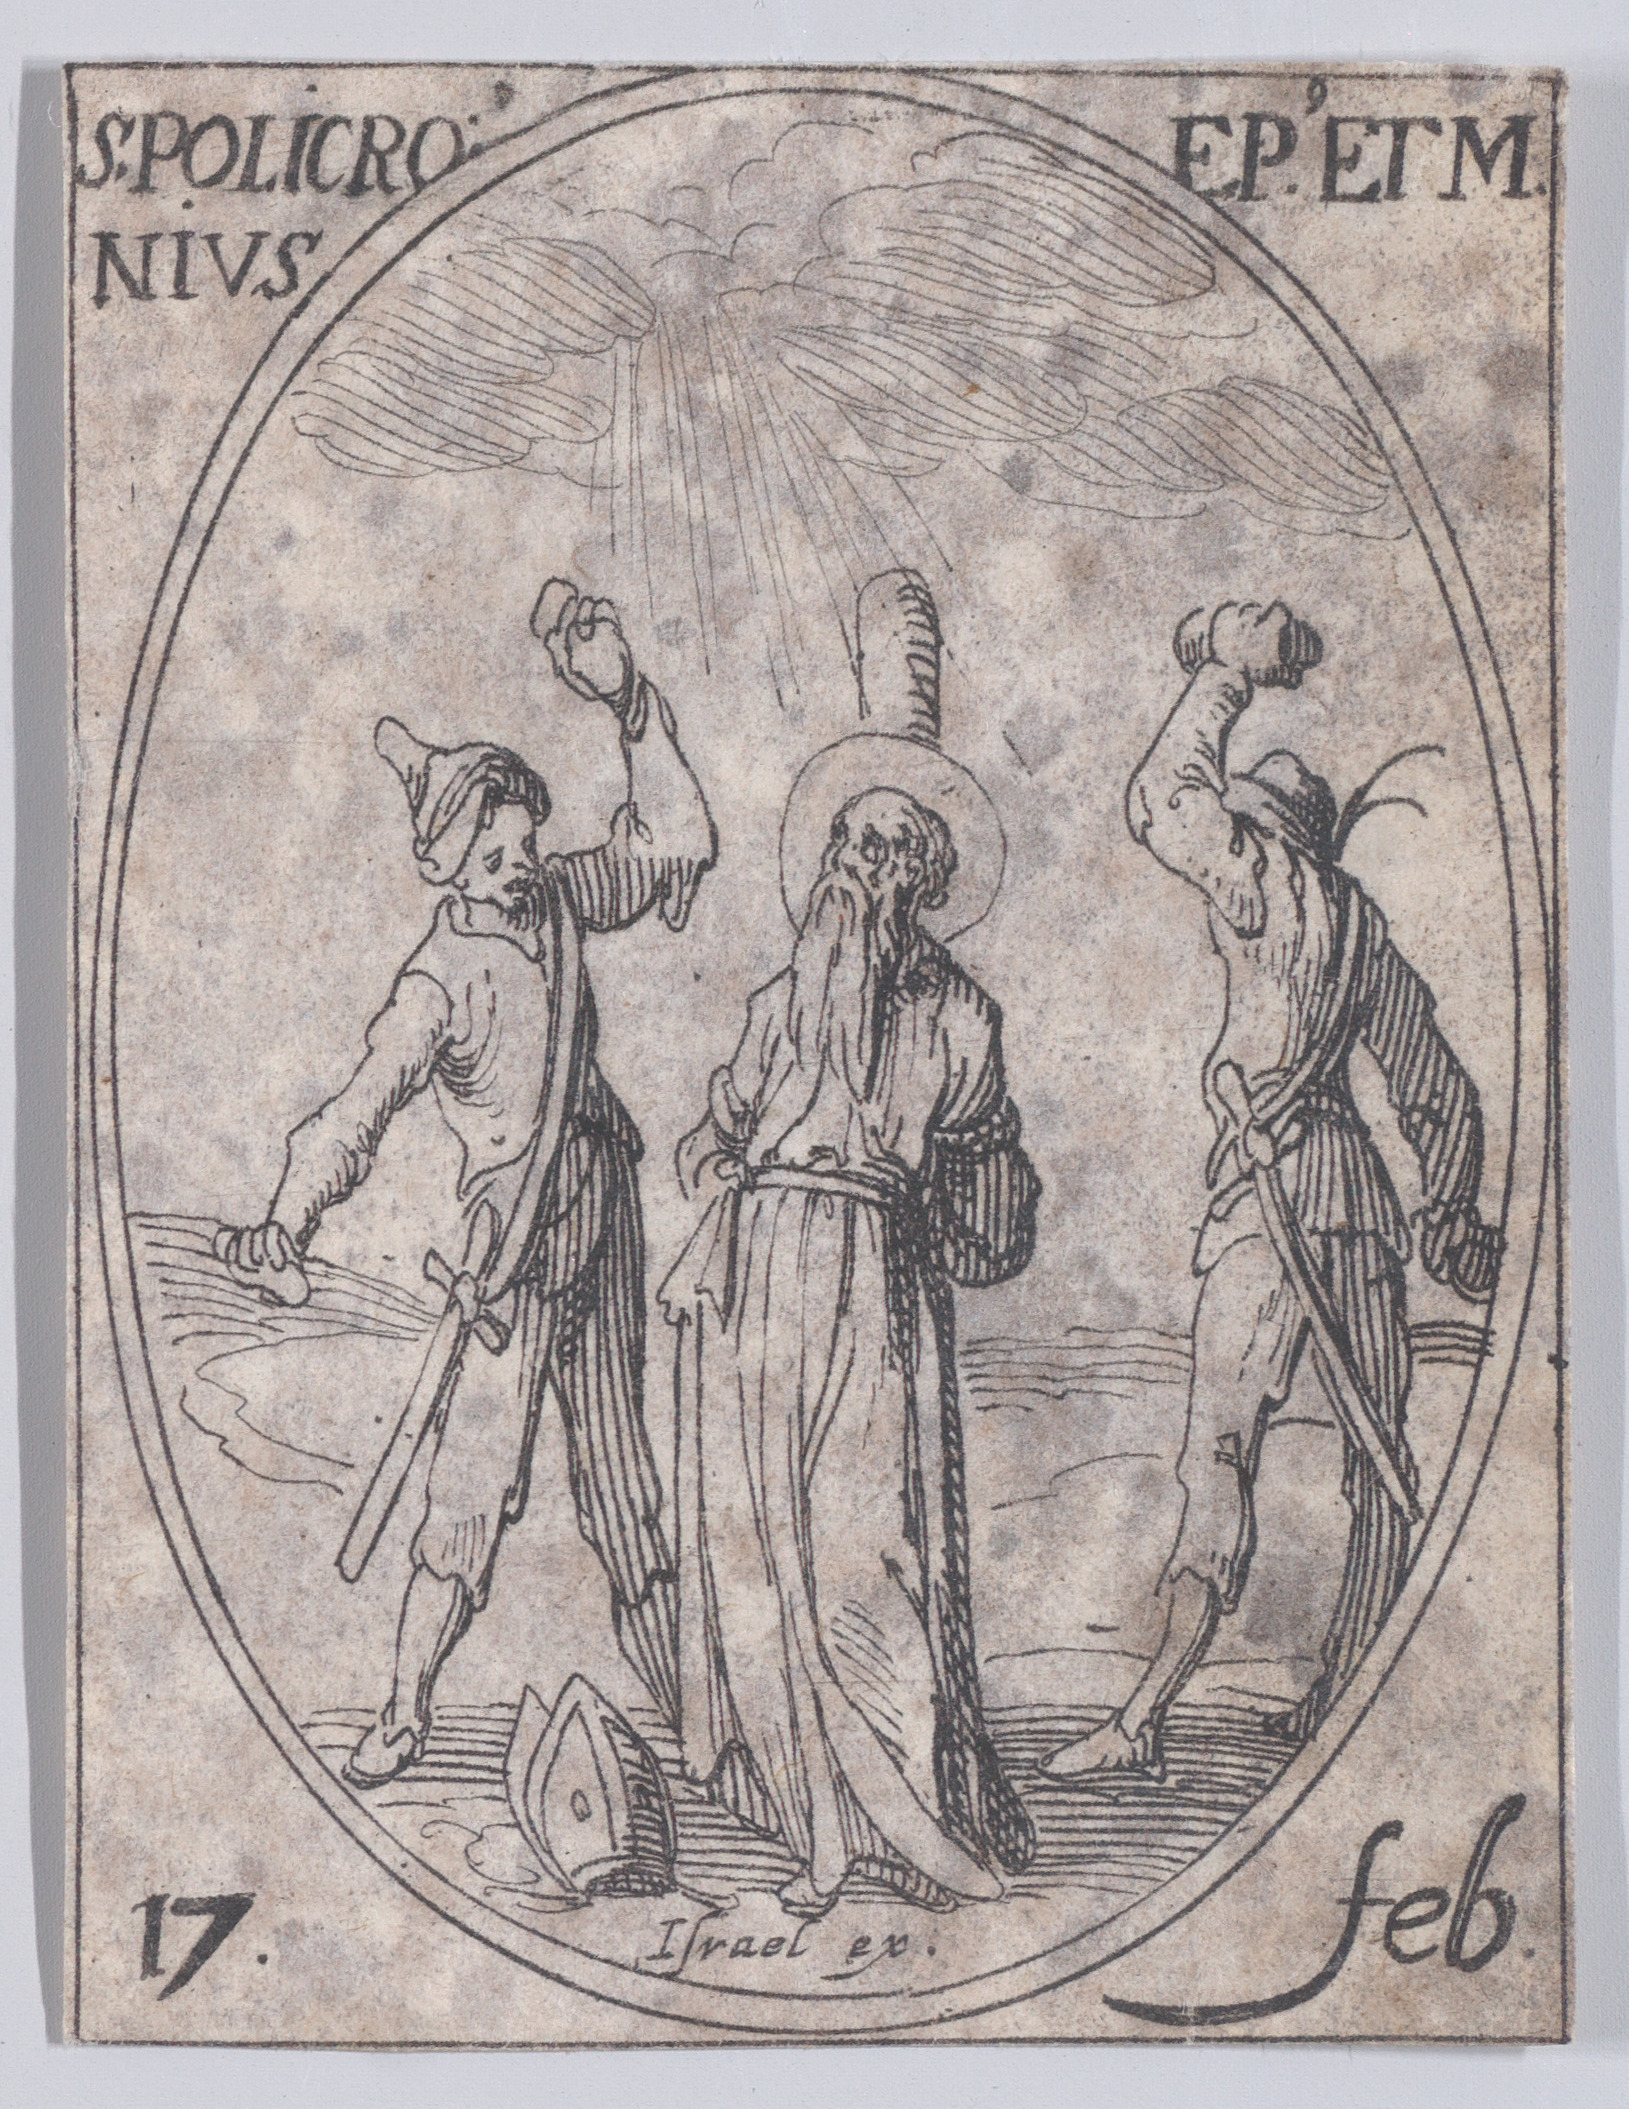 S. Polichroine, évêque et martyr (St. Polychronius, Bishop and Martyr), February 17th, from Les Images De Tous Les Saincts et Saintes de L'Année (Images of All of the Saints and Religious Events of the Year), Jacques Callot (French, Nancy 1592–1635 Nancy), Etching; second state of two (Lieure)